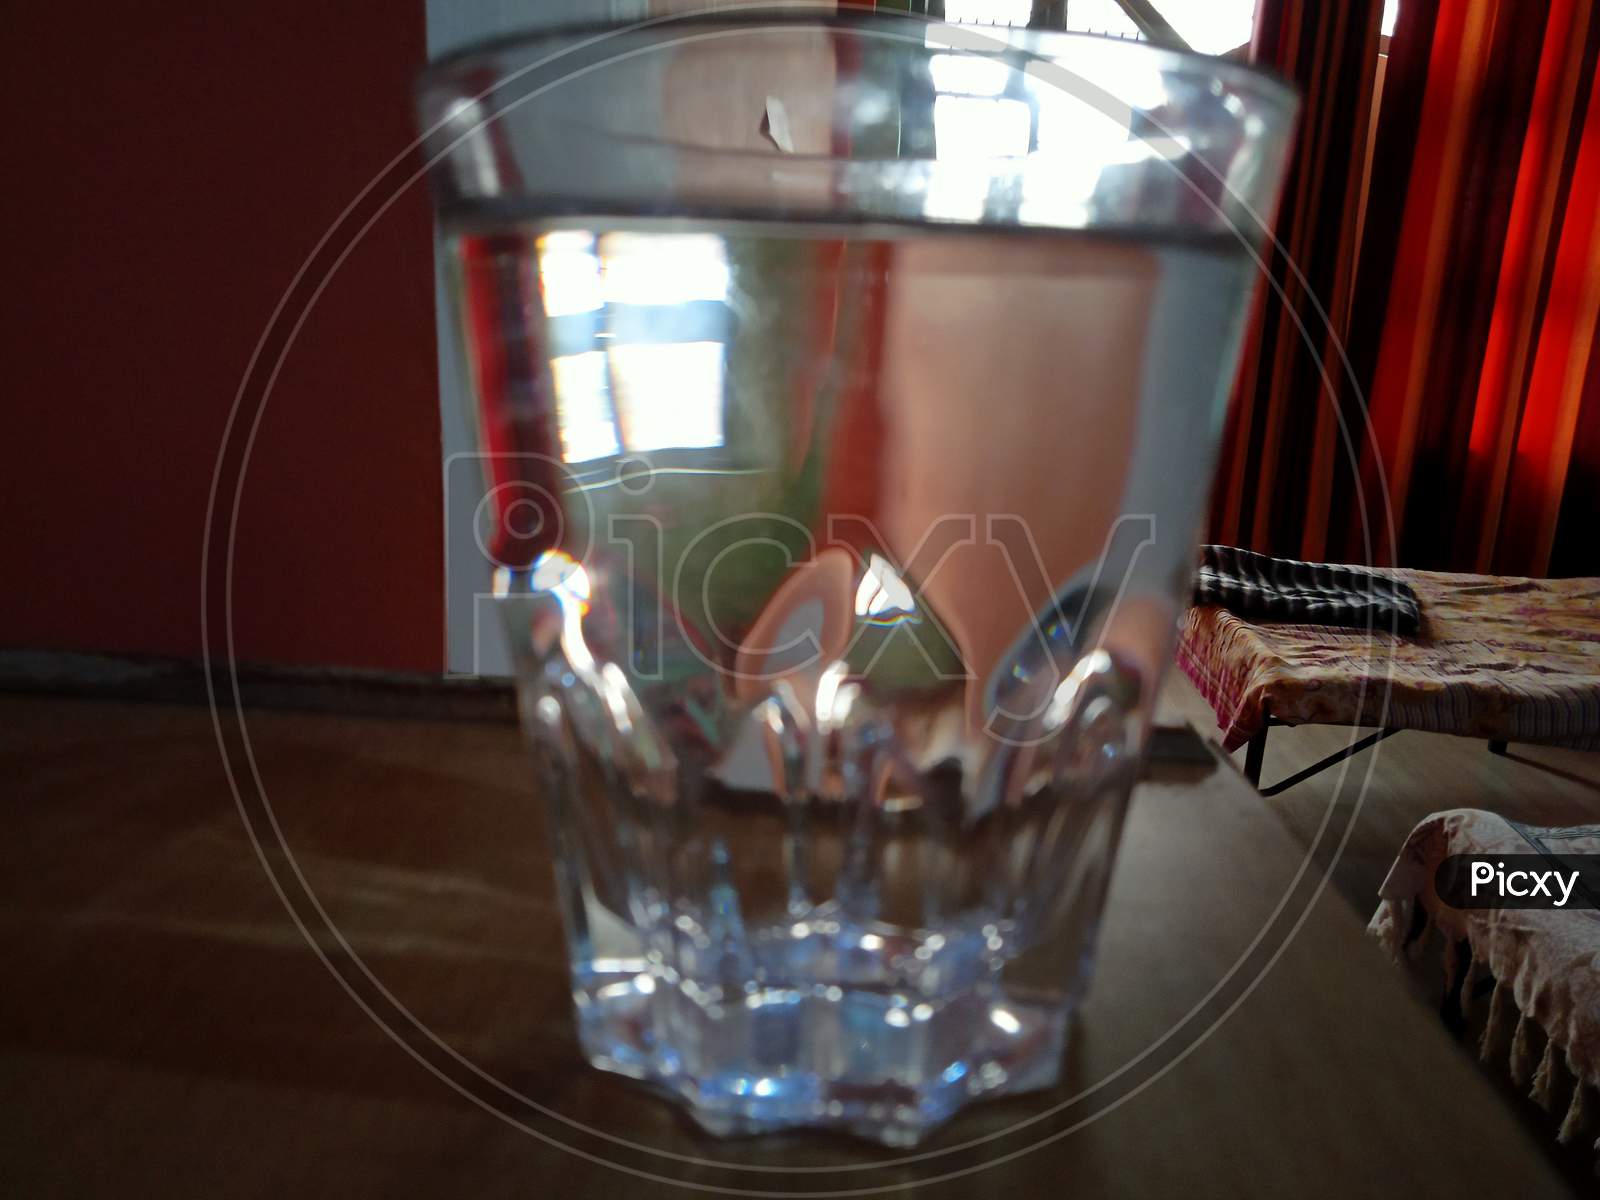 A glass full of water or Vodka